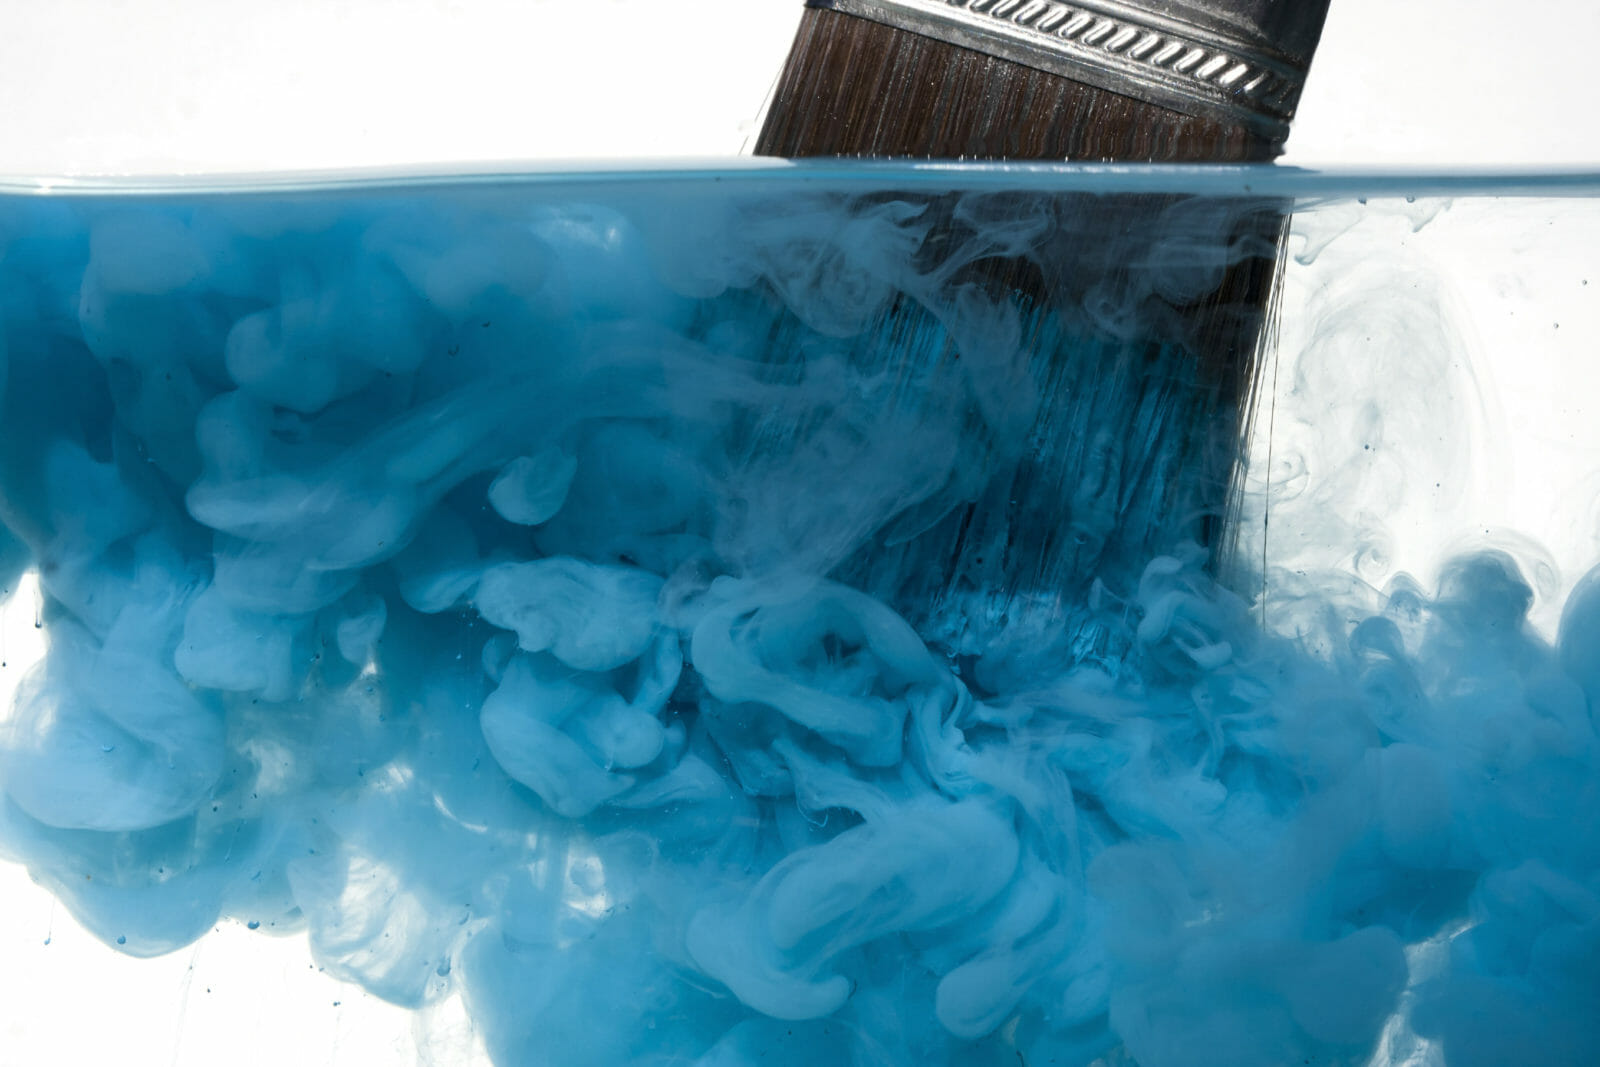 Quick guide on how to wash paintbrushes